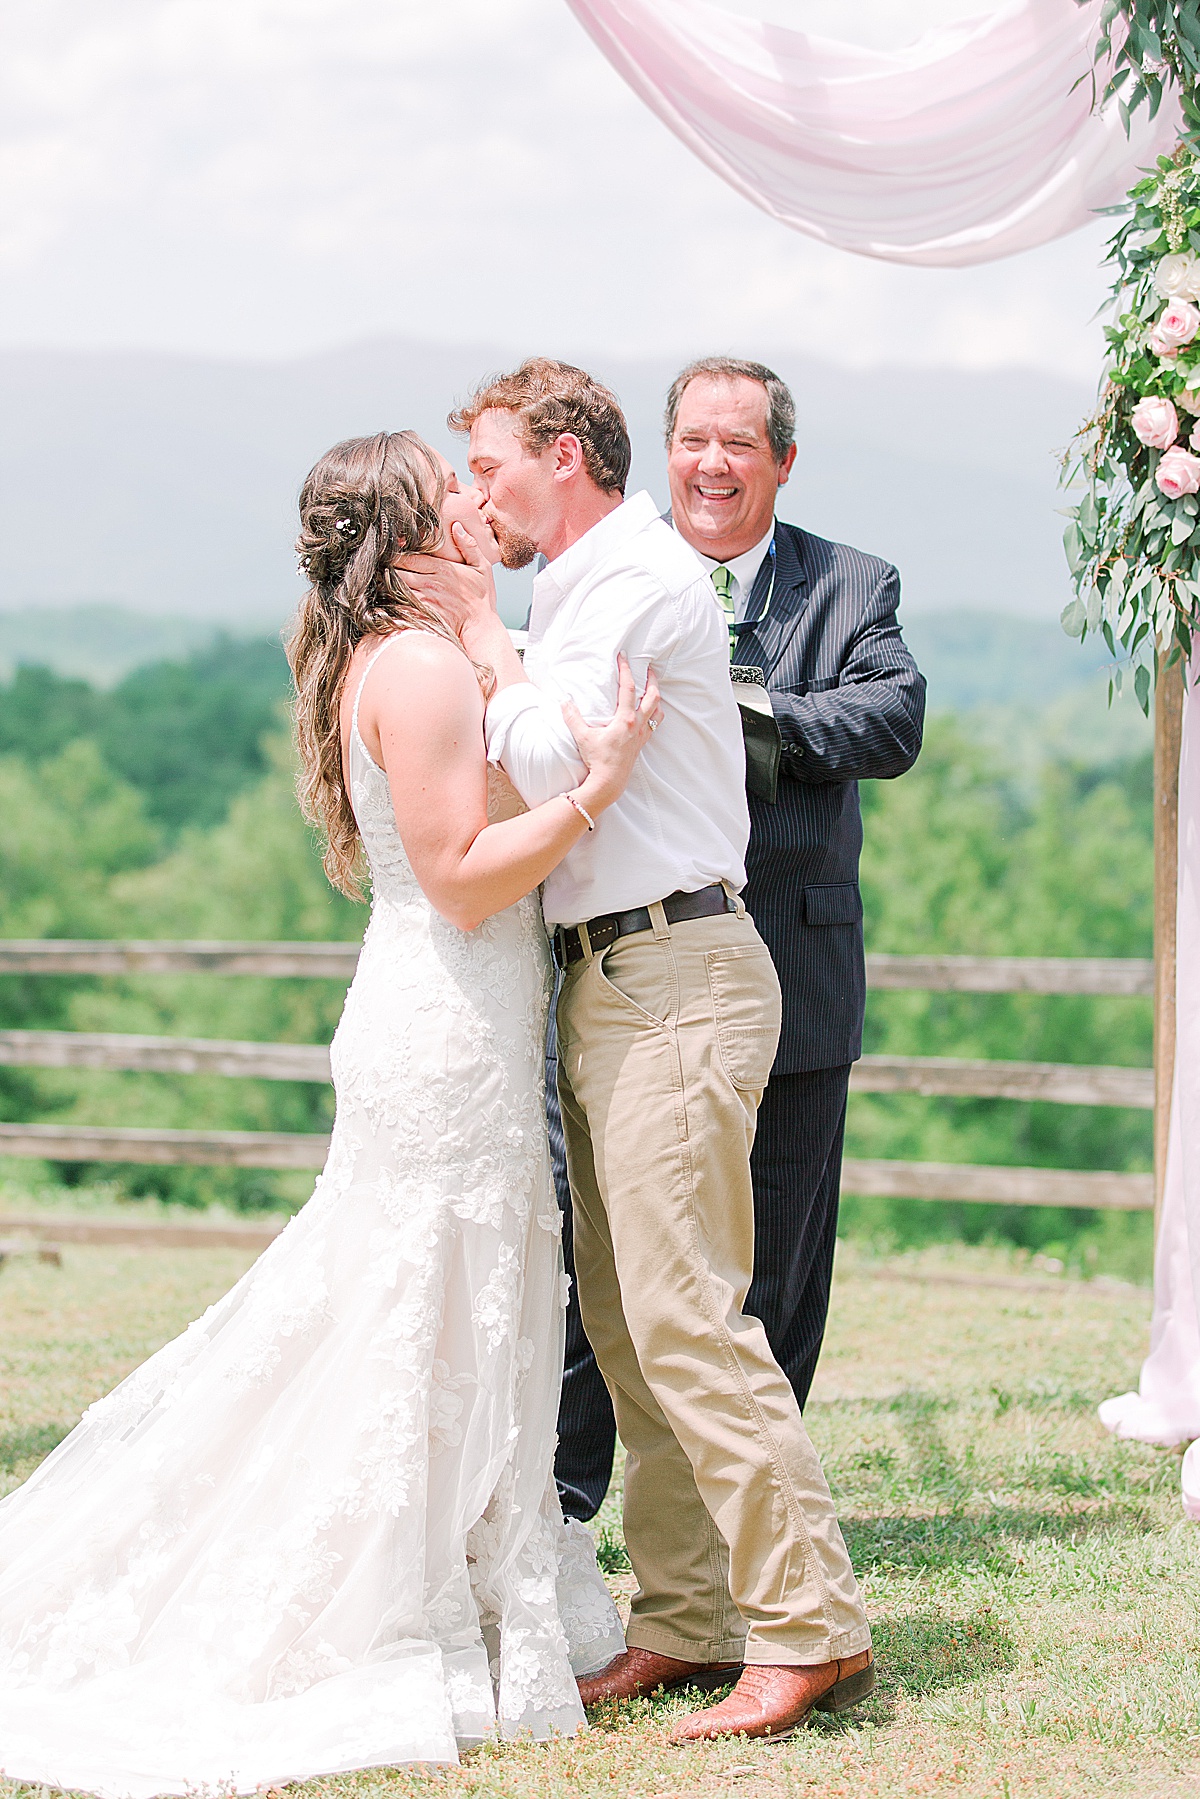 Rustic Spring Mountain Wedding Ceremony Bride and Groom's First Kiss Pastor smiling in Background Photo